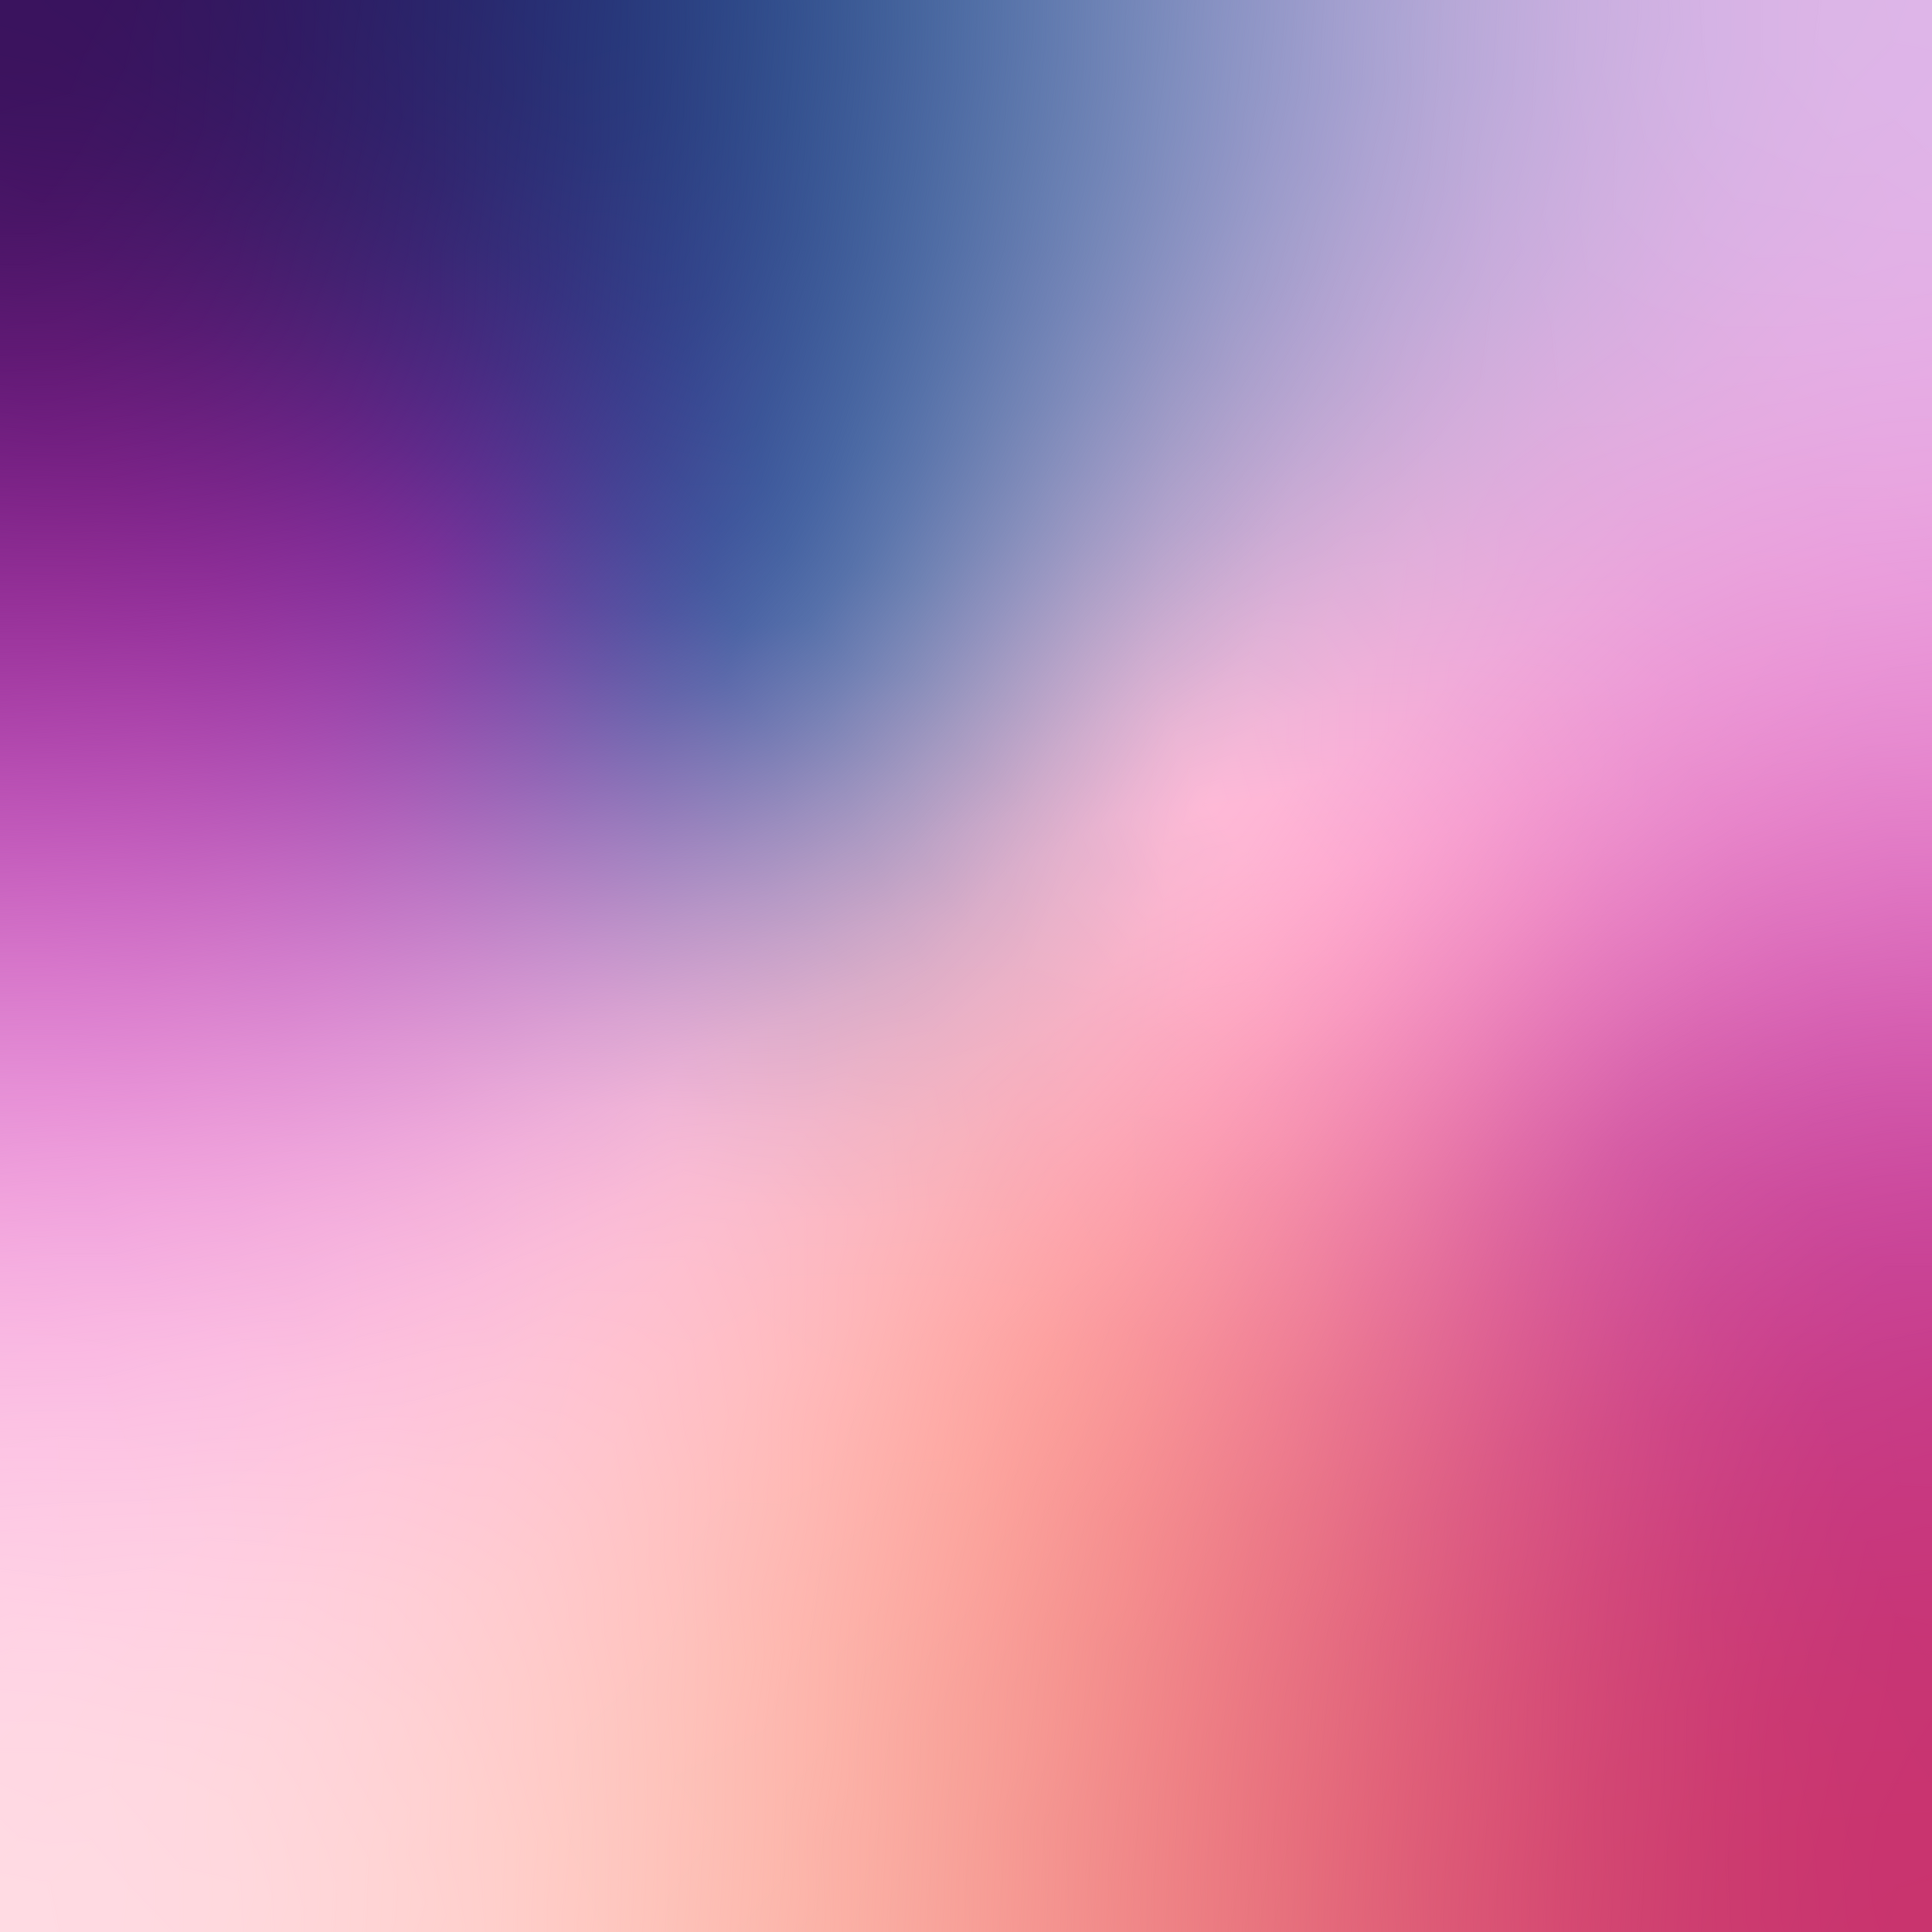 Pink and Violet Gradient Backgrounds